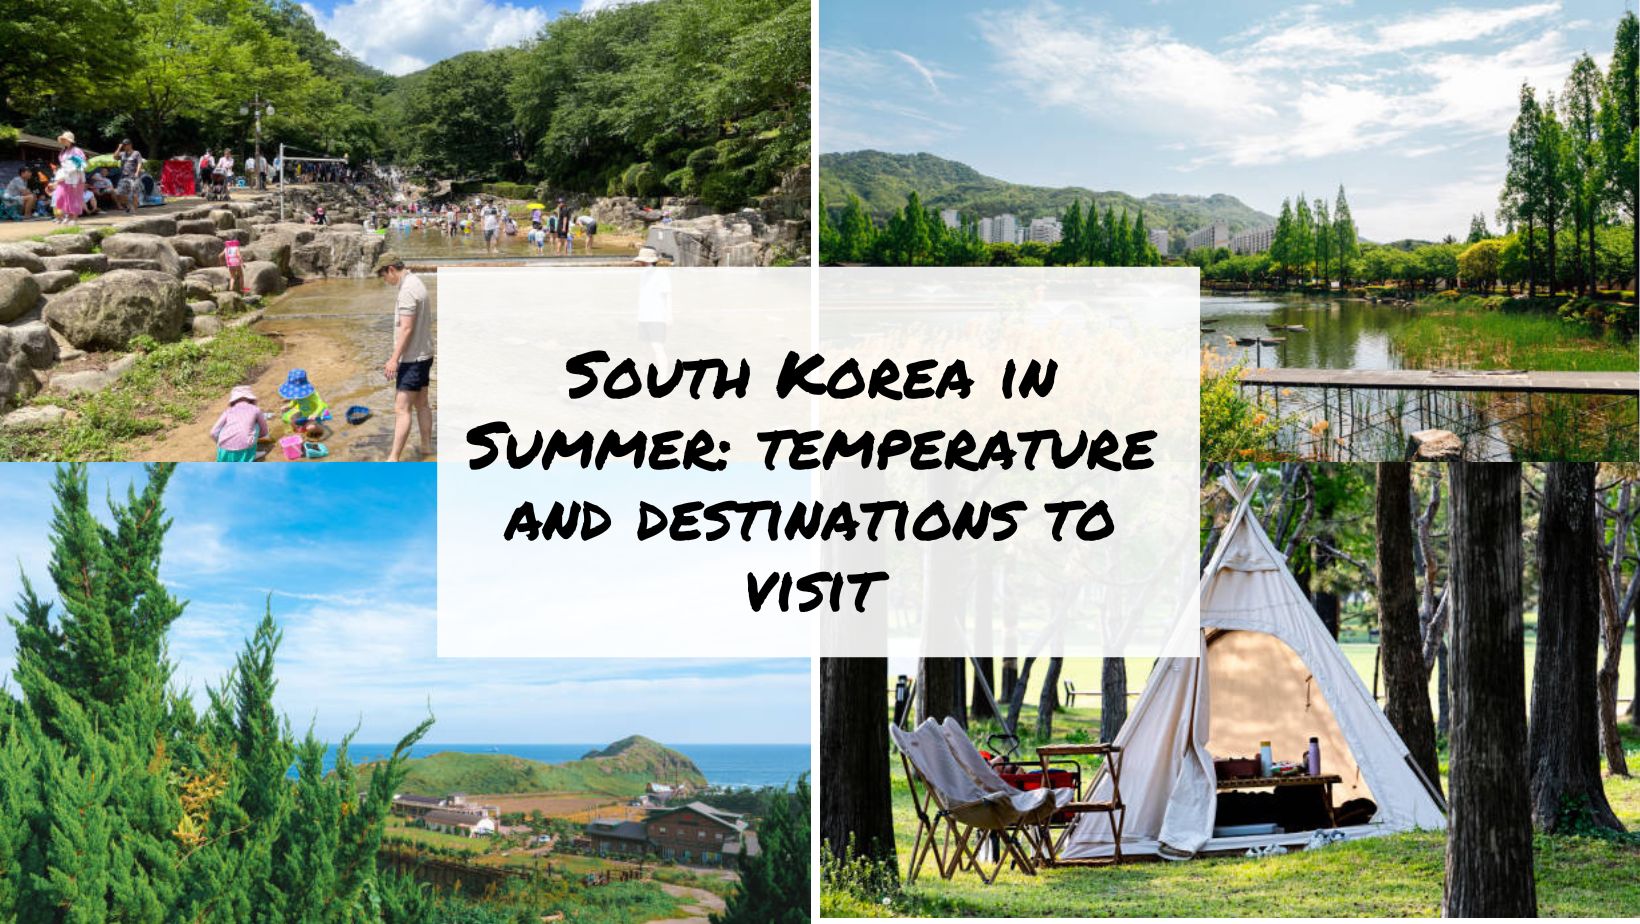 South Korea in Summer temperature and destinations to visit